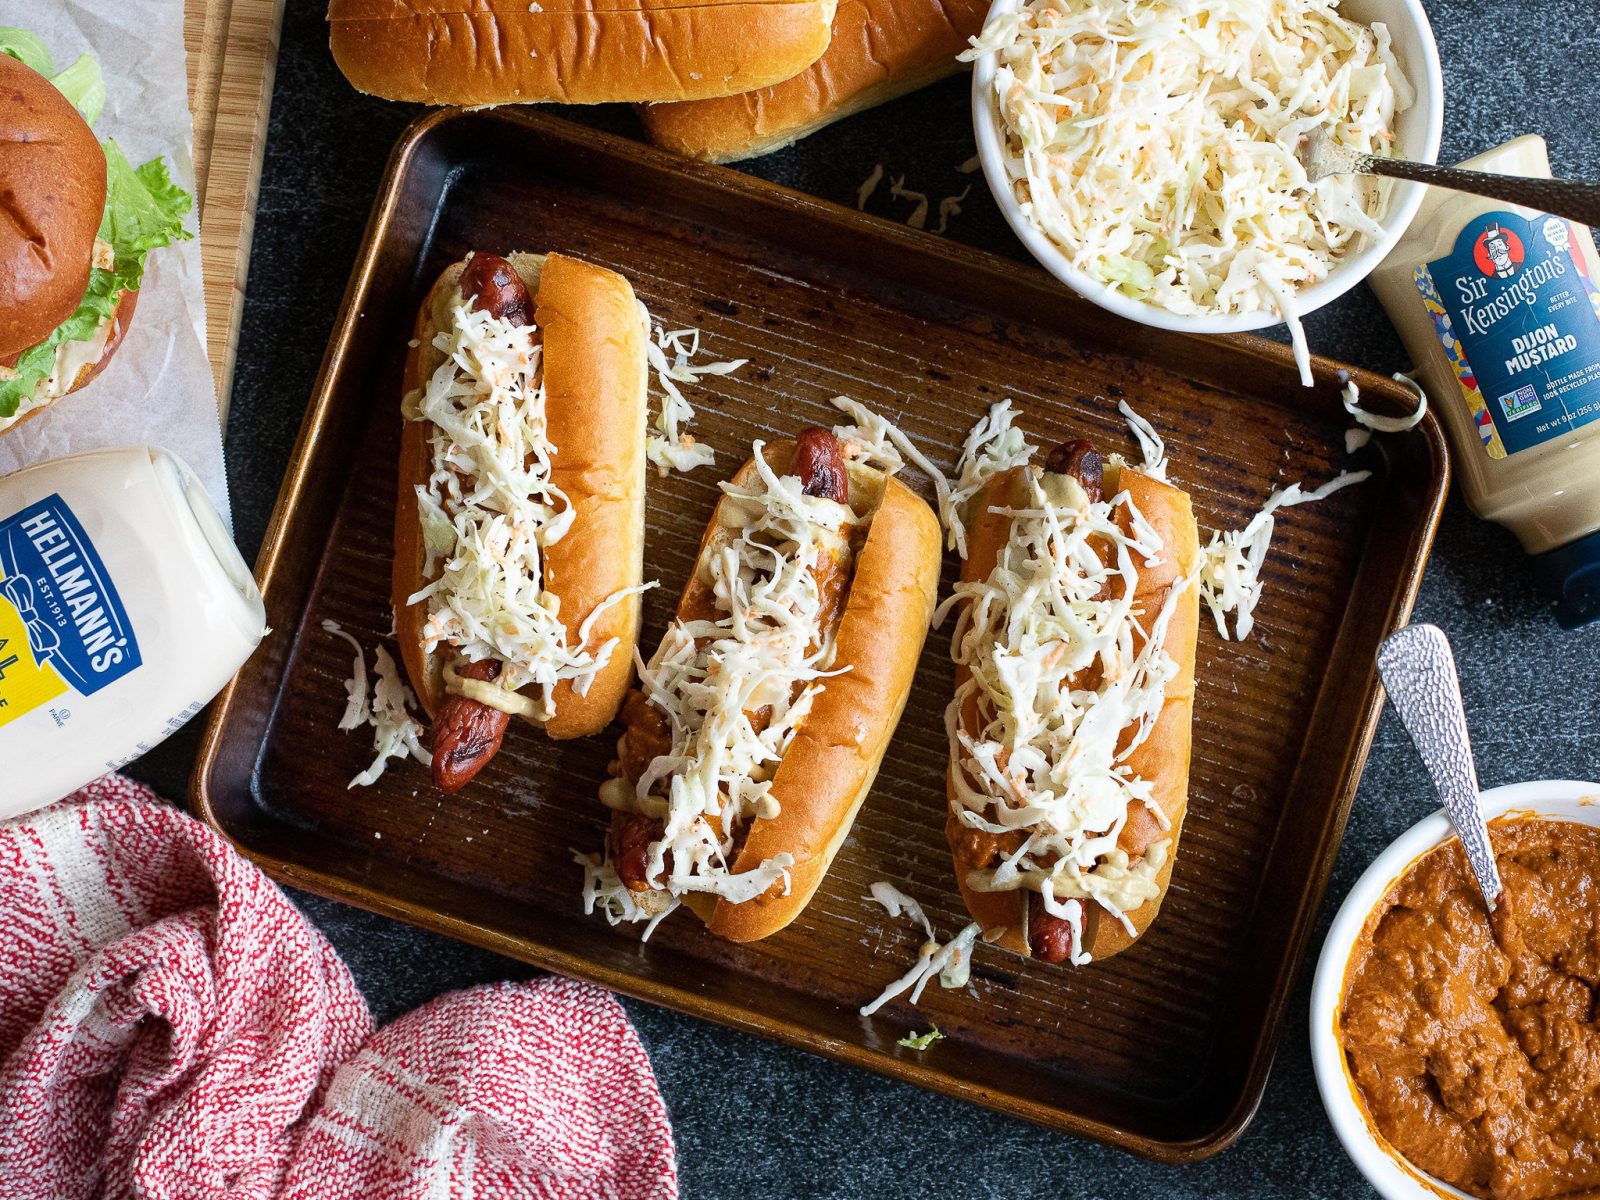 Grab A Deal On Hellmann’s Mayonnaise & Whip Up Some Summer Slaw Dogs